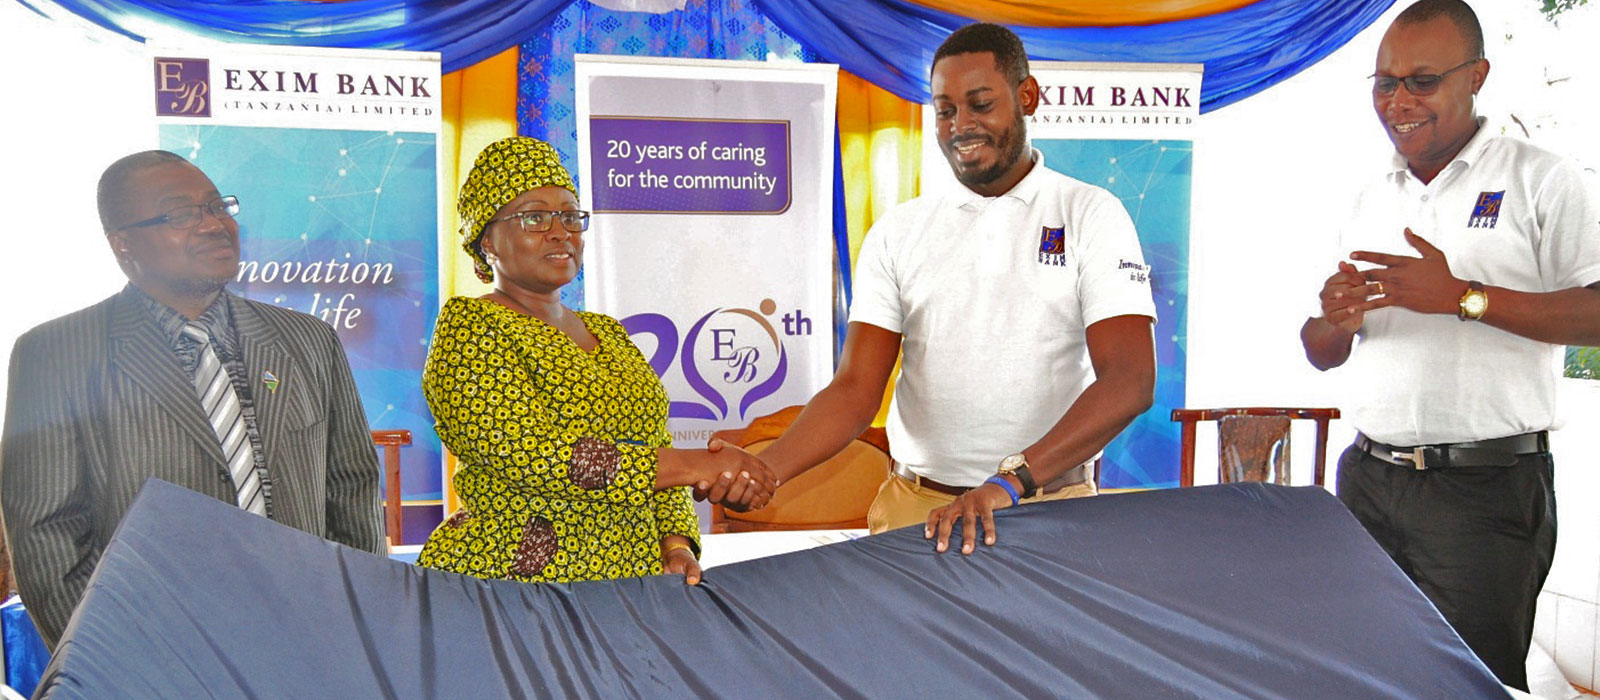 Exim Bank concludes year-long 20th anniversary campaign at Maweni Regional Hospital